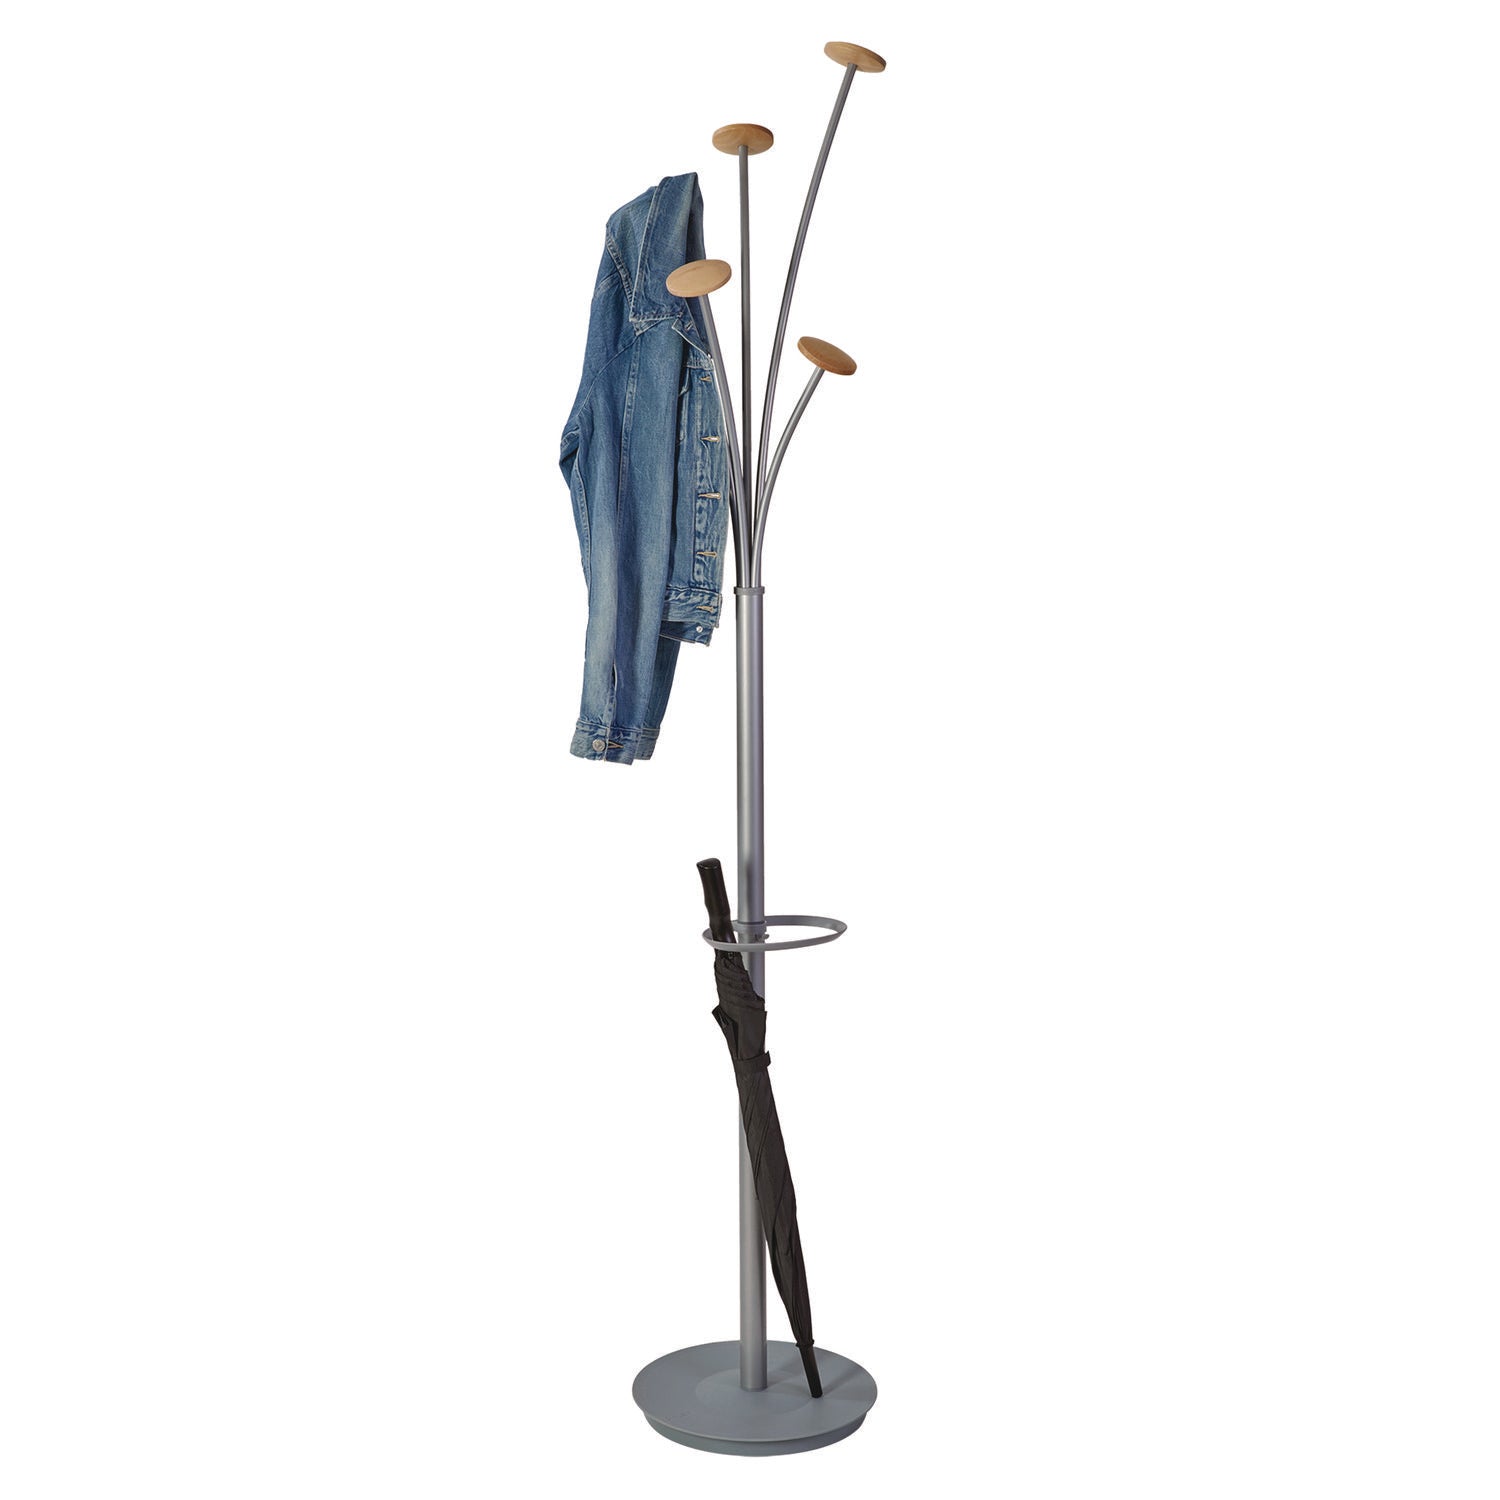 festival-coat-stand-with-umbrella-holder-five-knobs-1397-x-14-x-7362-gray_abapmfestwm - 2